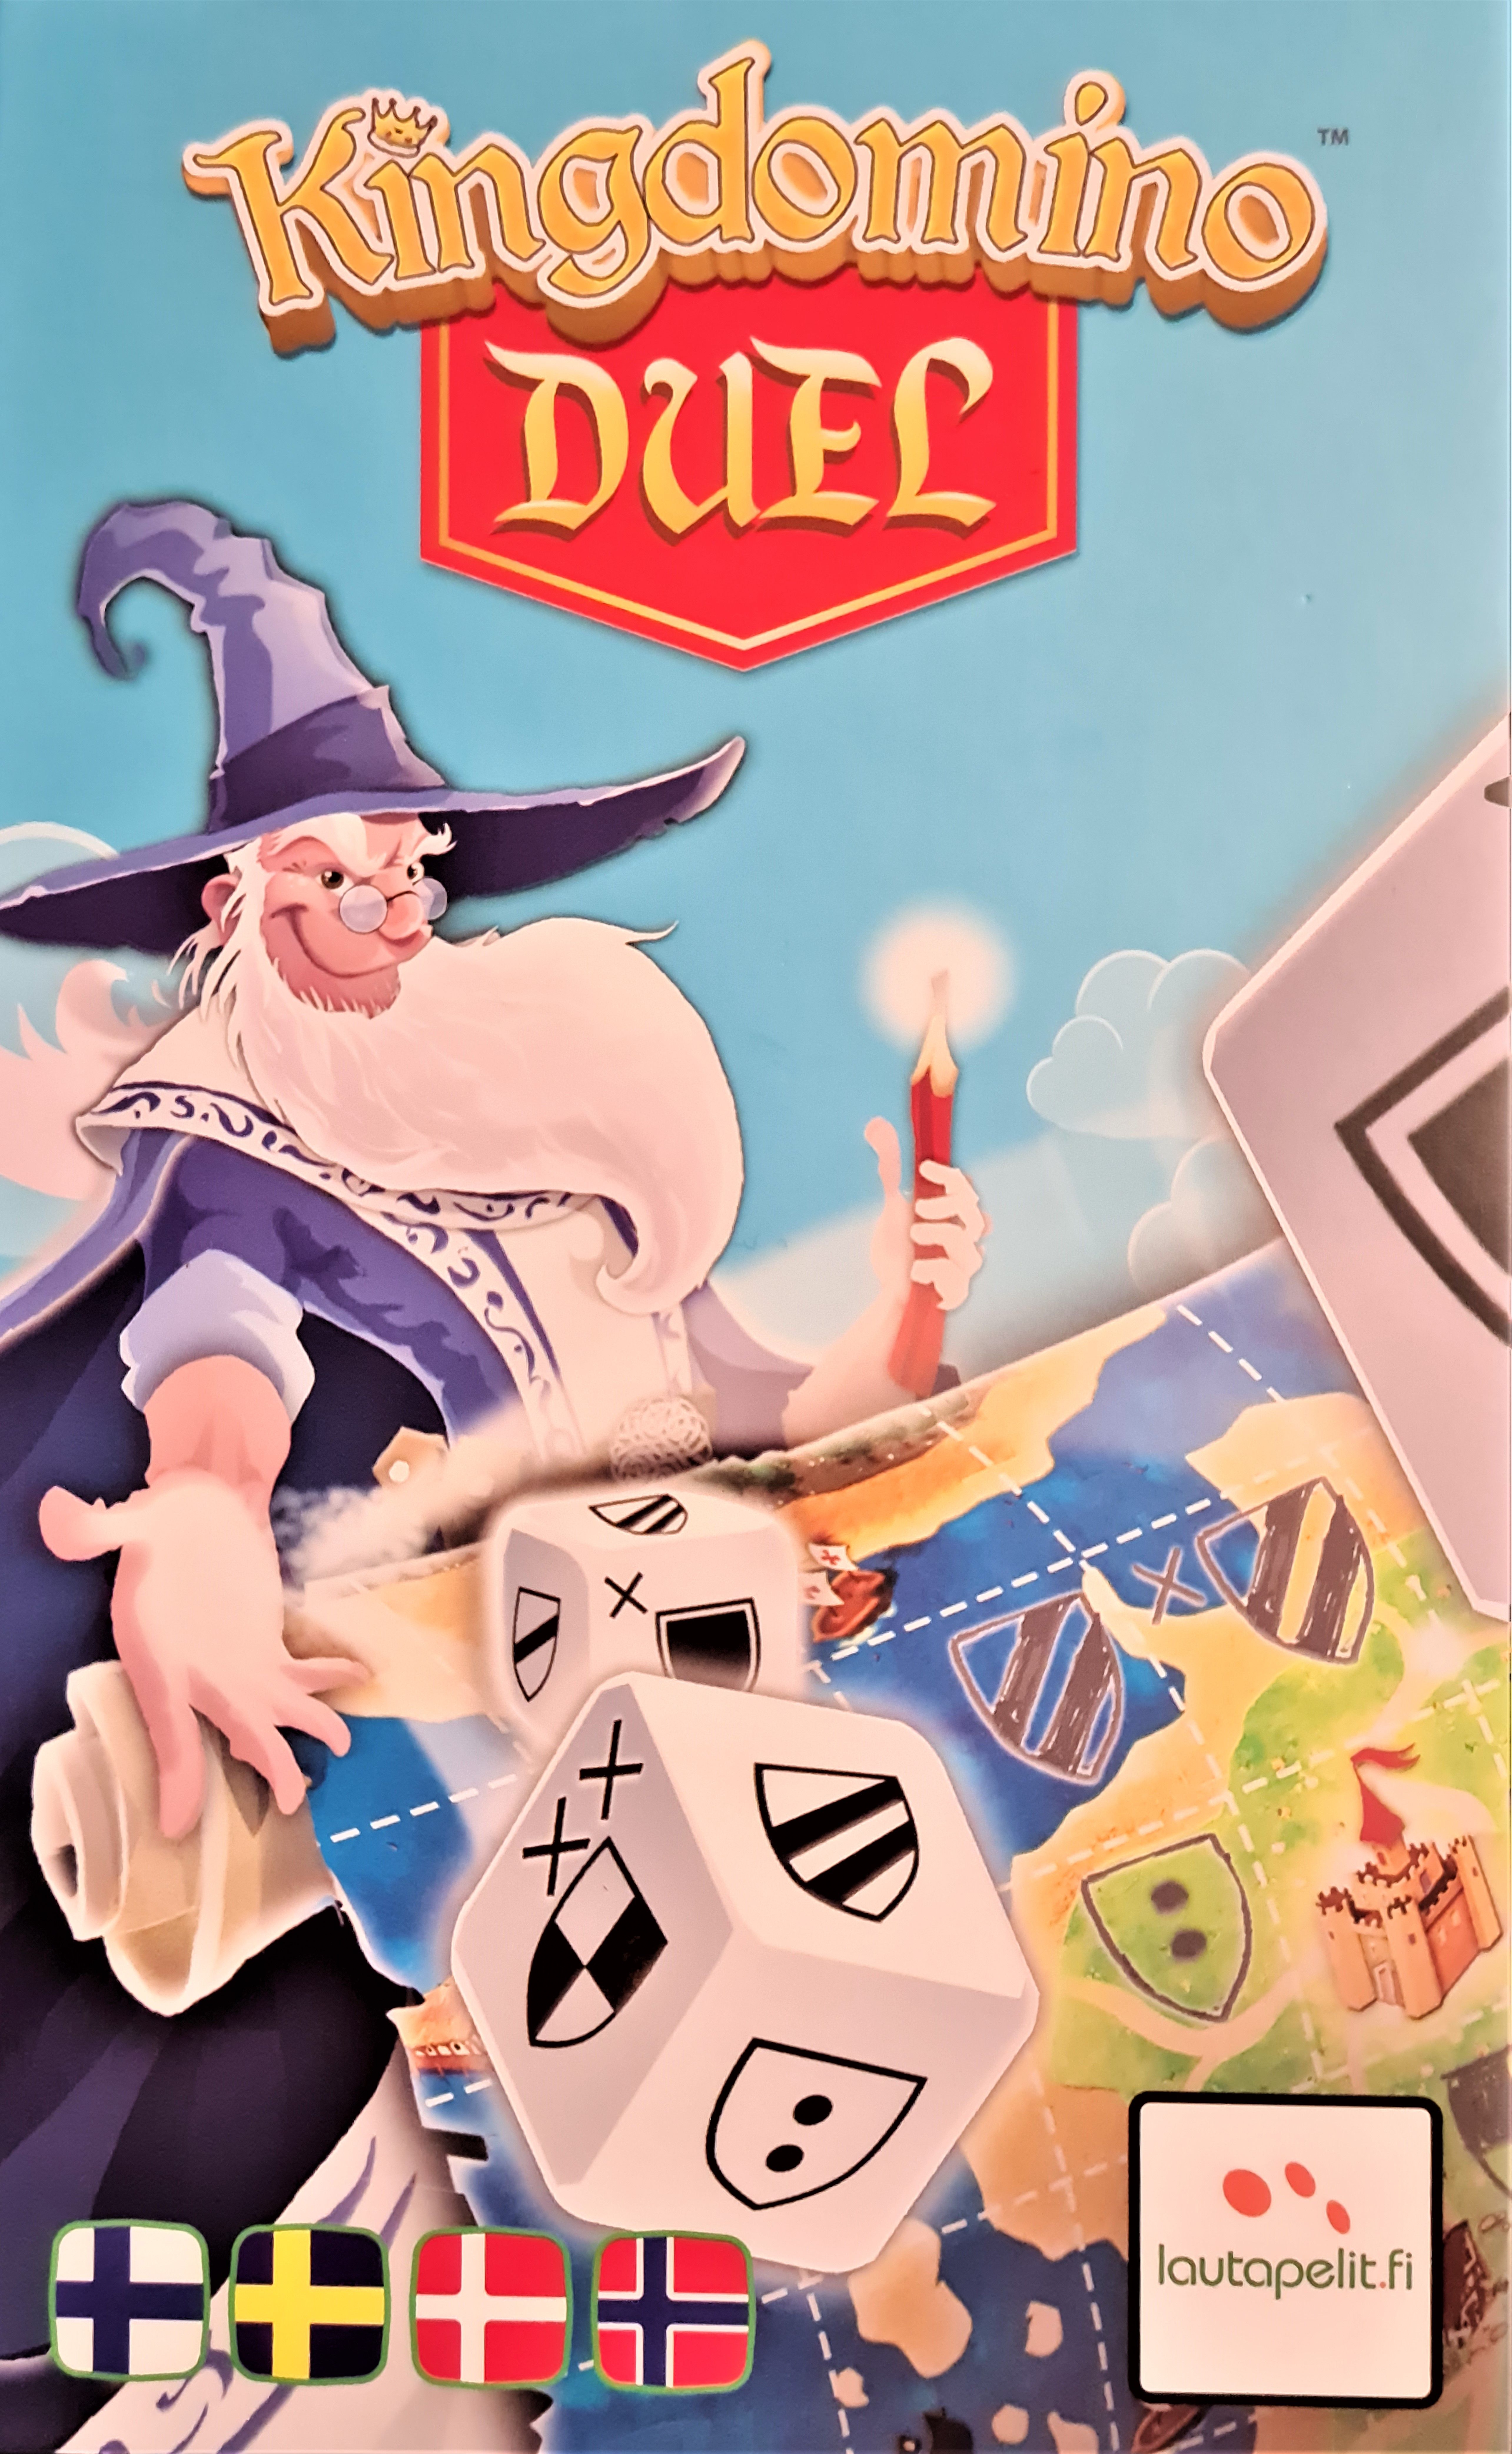 Read more about the article Kingdomino DUEL